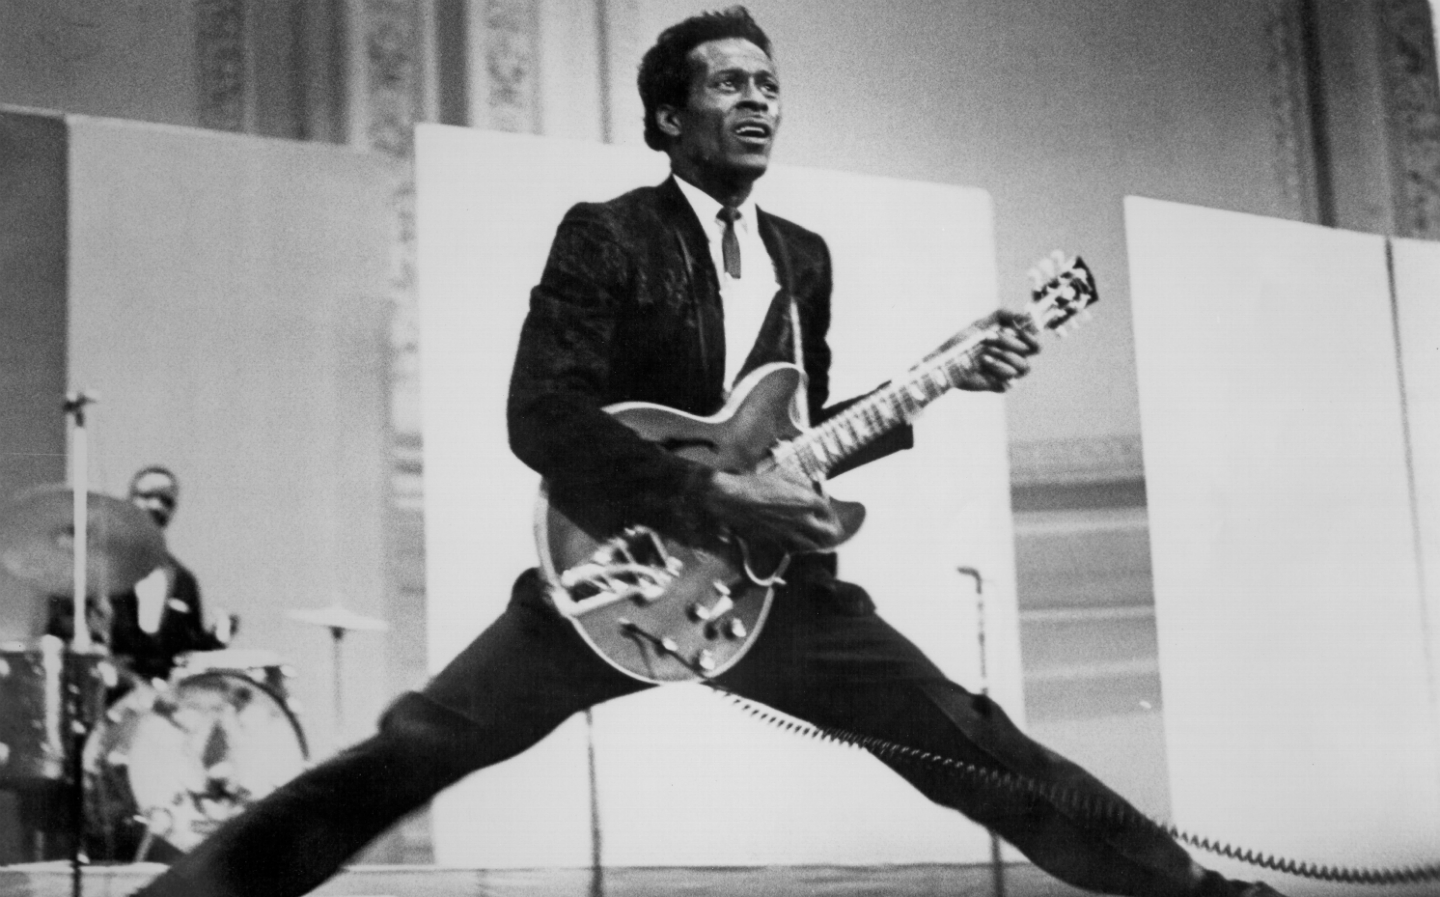 Drive time: new Chuck Berry album to rev up drivers